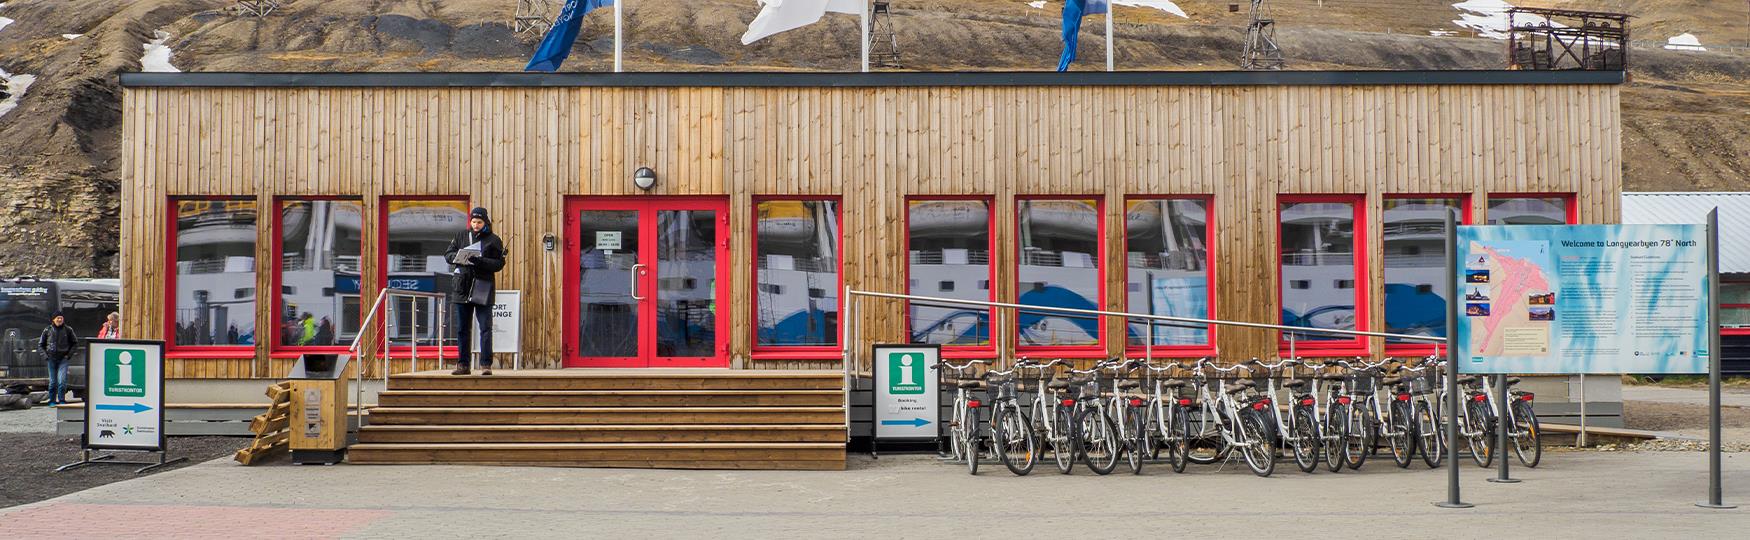 Open port lounge in the Port of Longyearbyen with a guest standing outside the front door, rental bikes and a map of Longyearbyen in the foreground